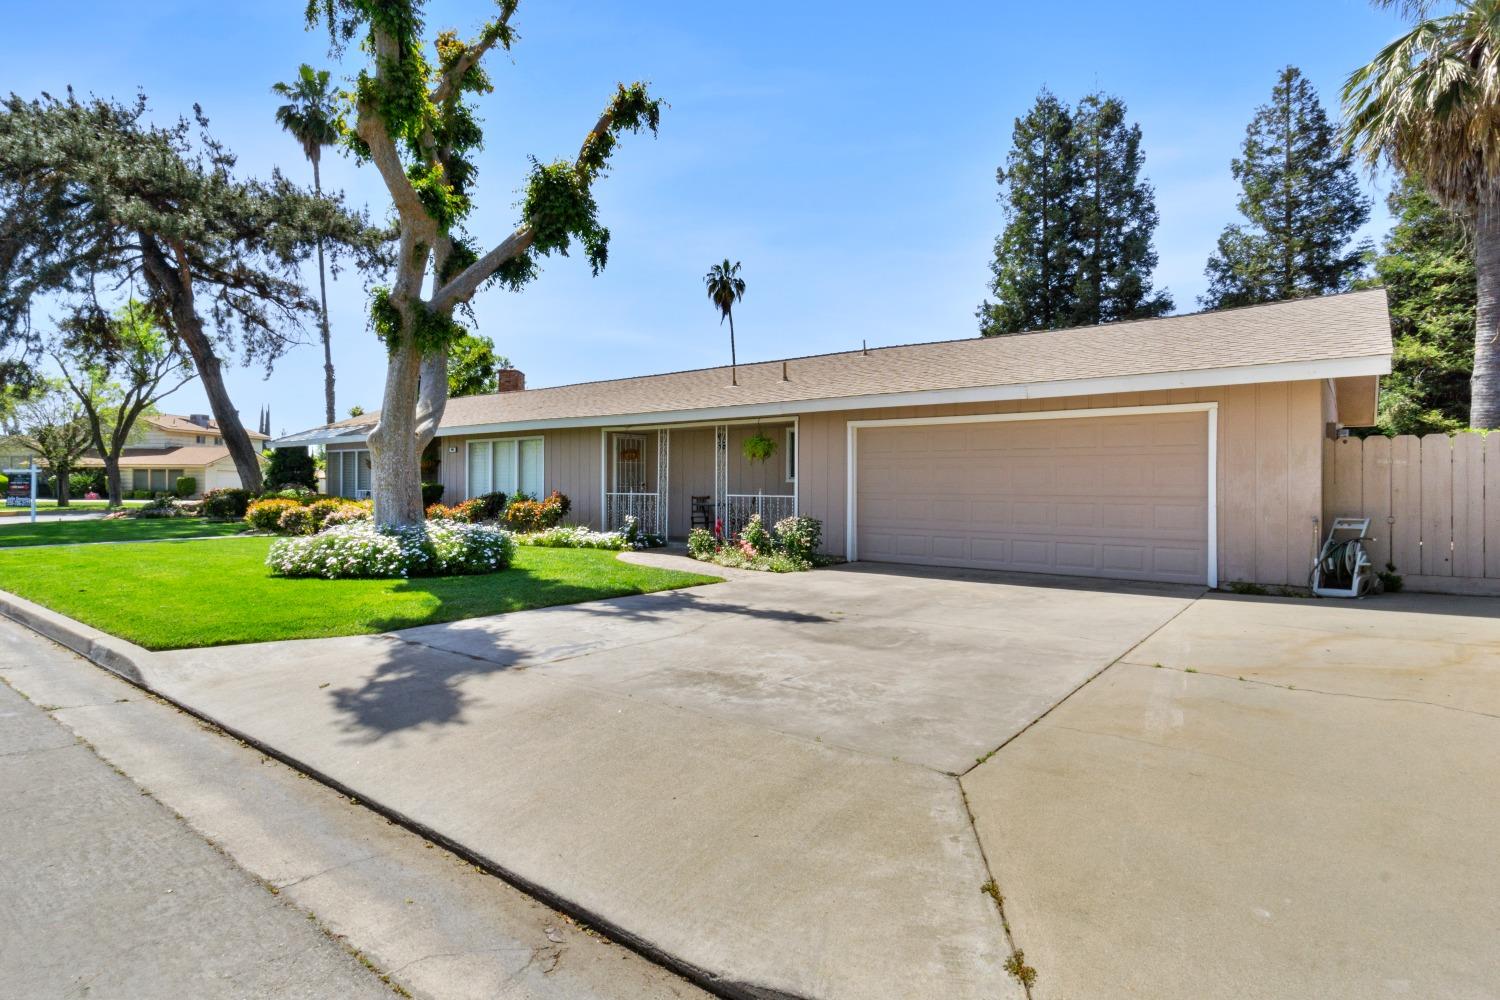 Photo of 400 Shannon Ave in Madera, CA